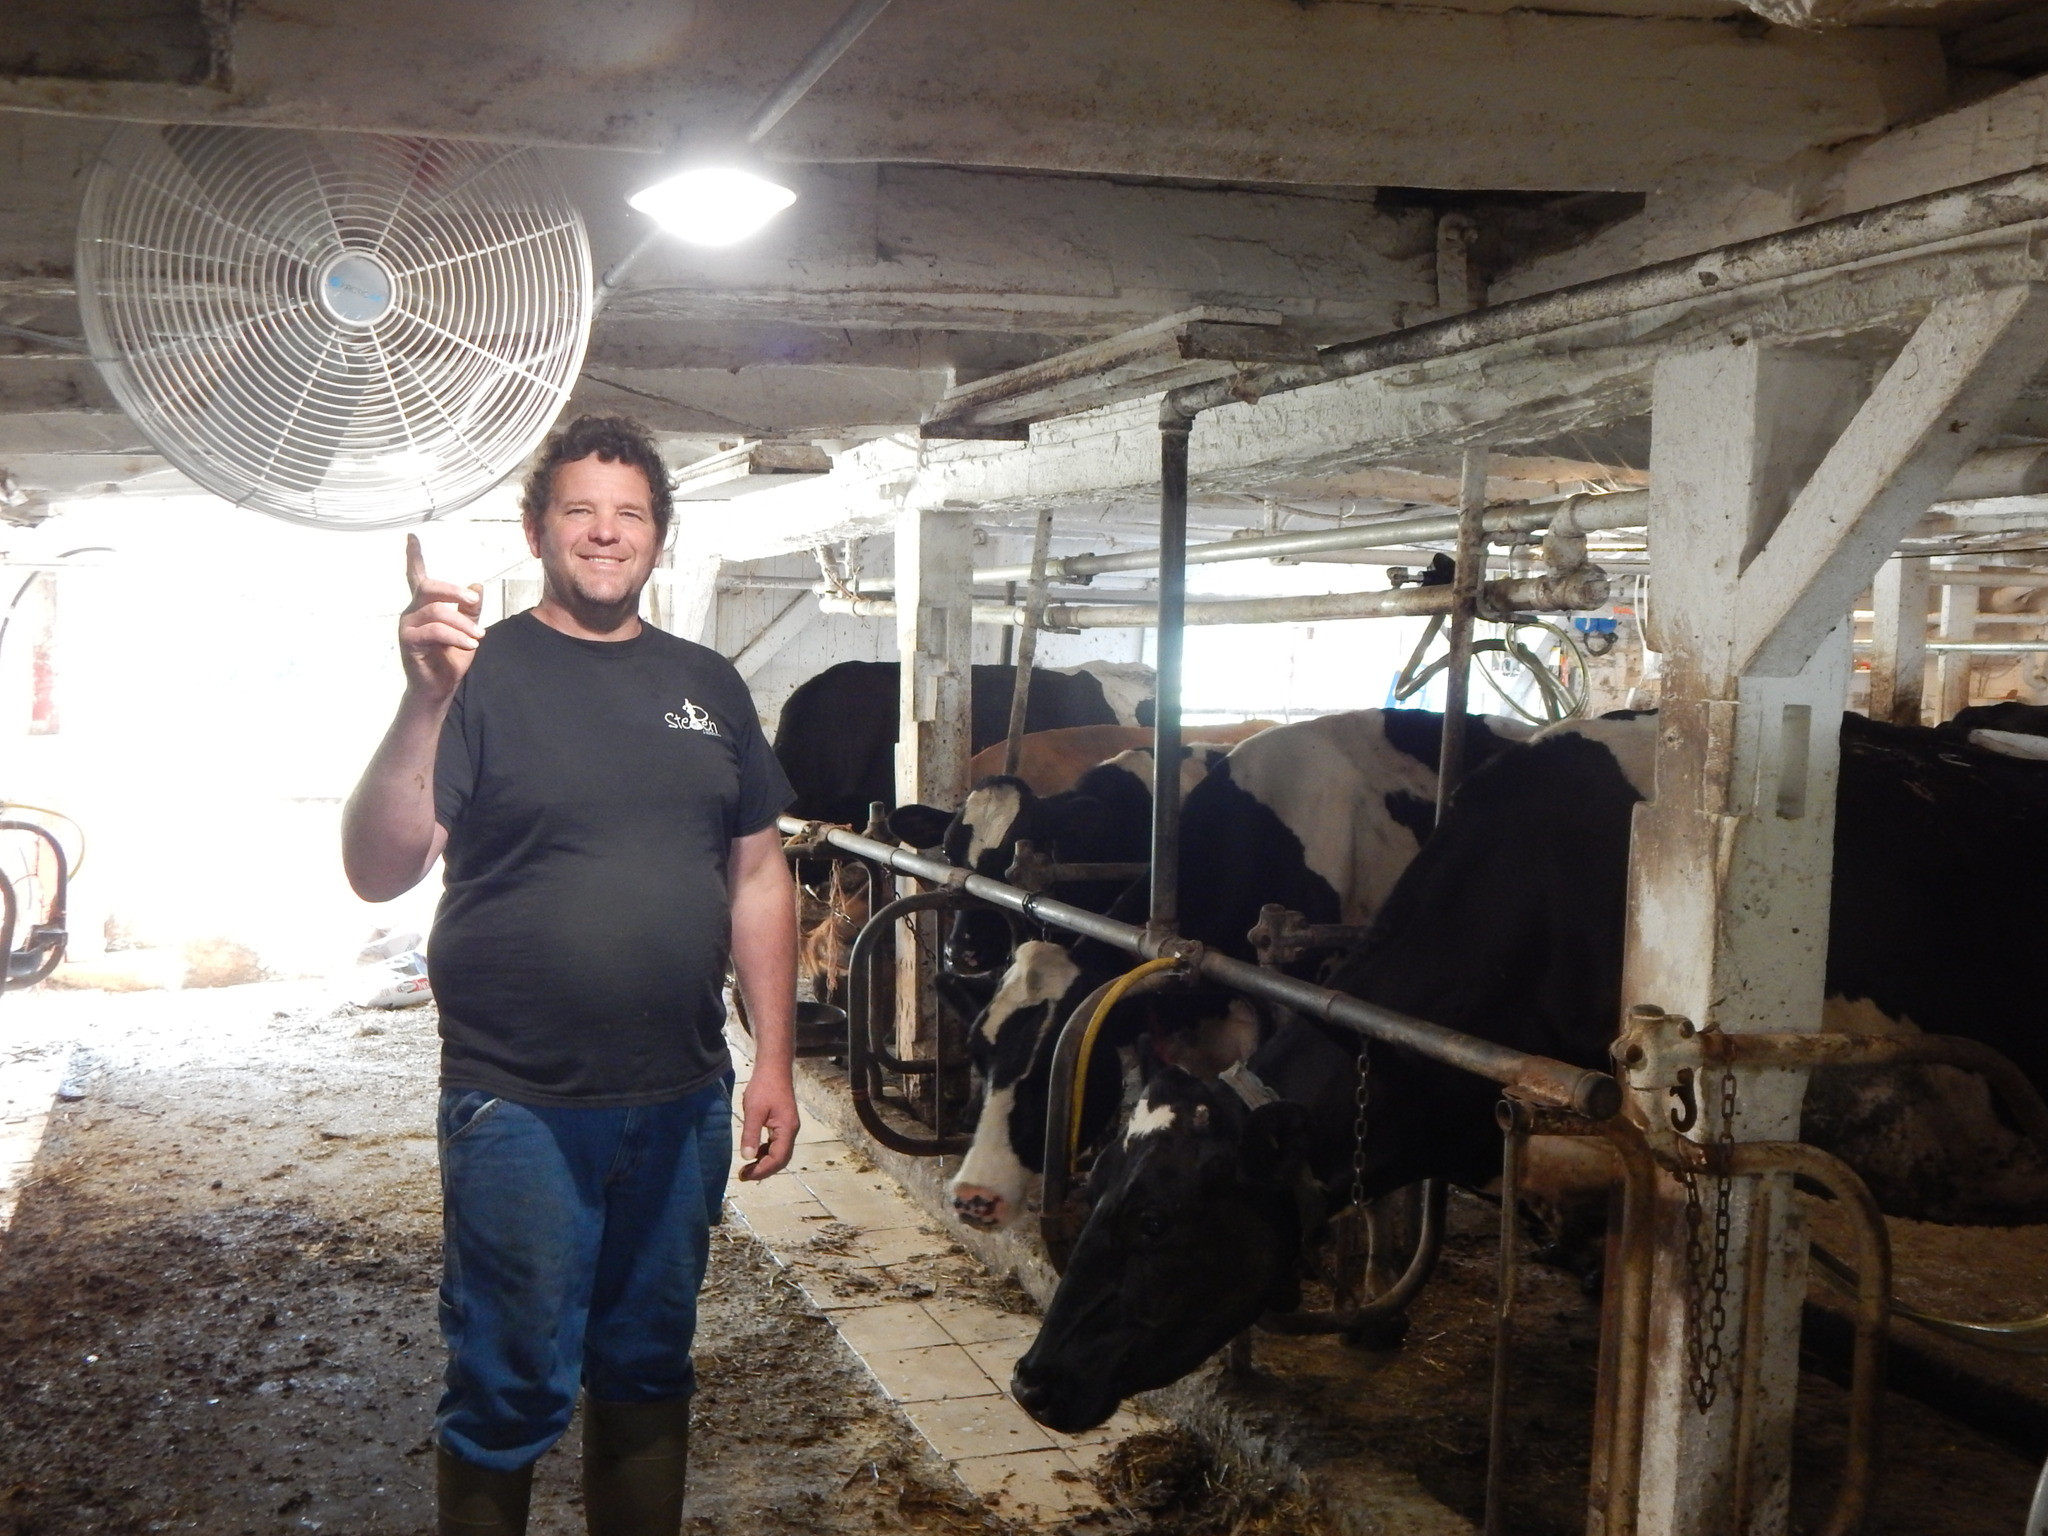 Steve Bishop of LBJ Farms improved the ventilation in his barn and milkhouse with funding assistance from the Stop COVID on Your Farm program